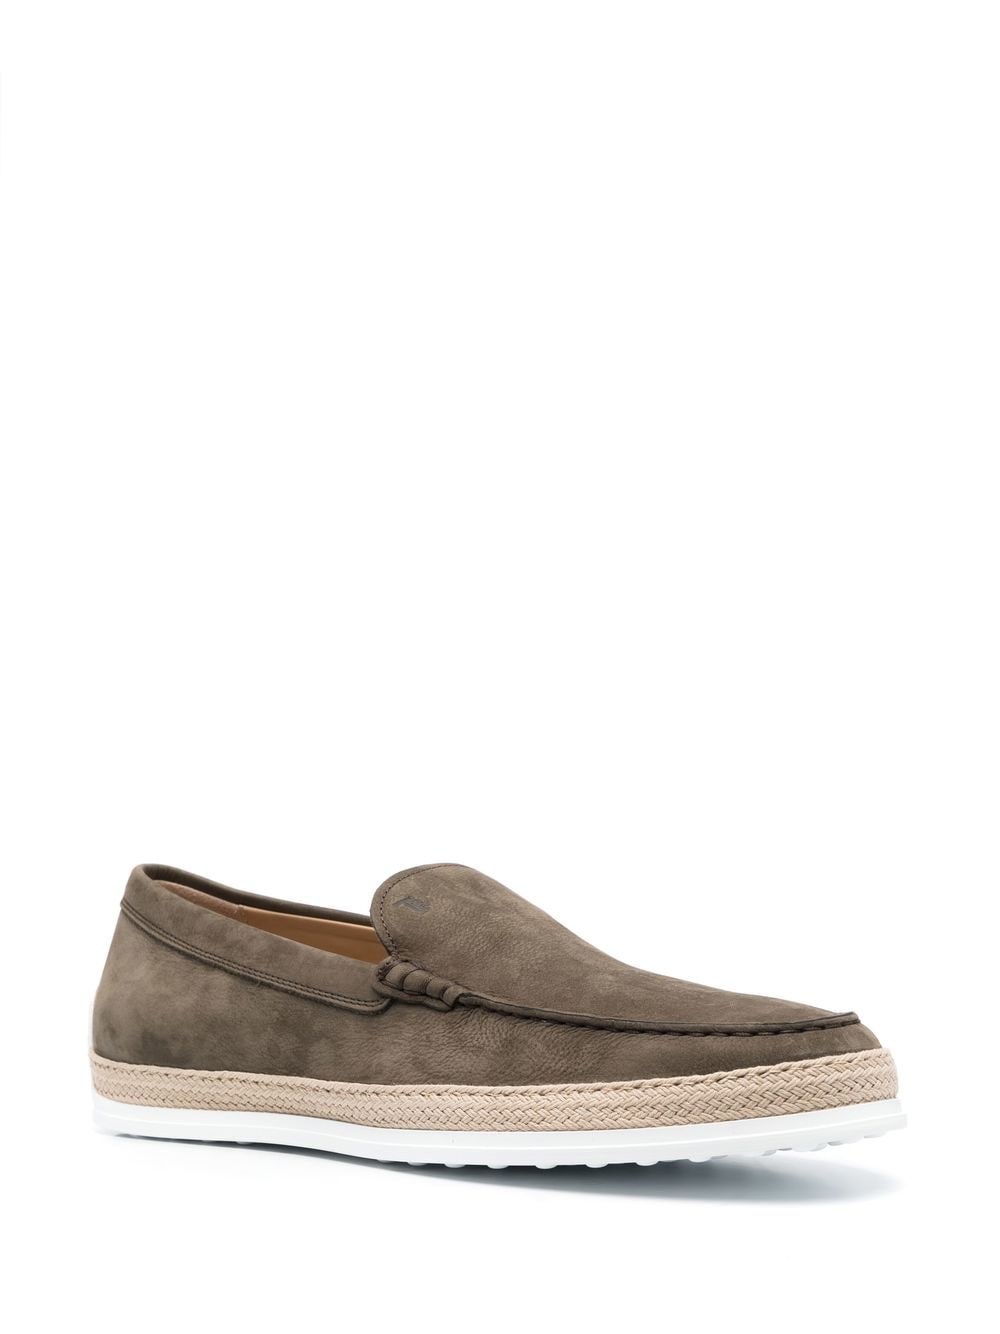 Slip-on style loafers